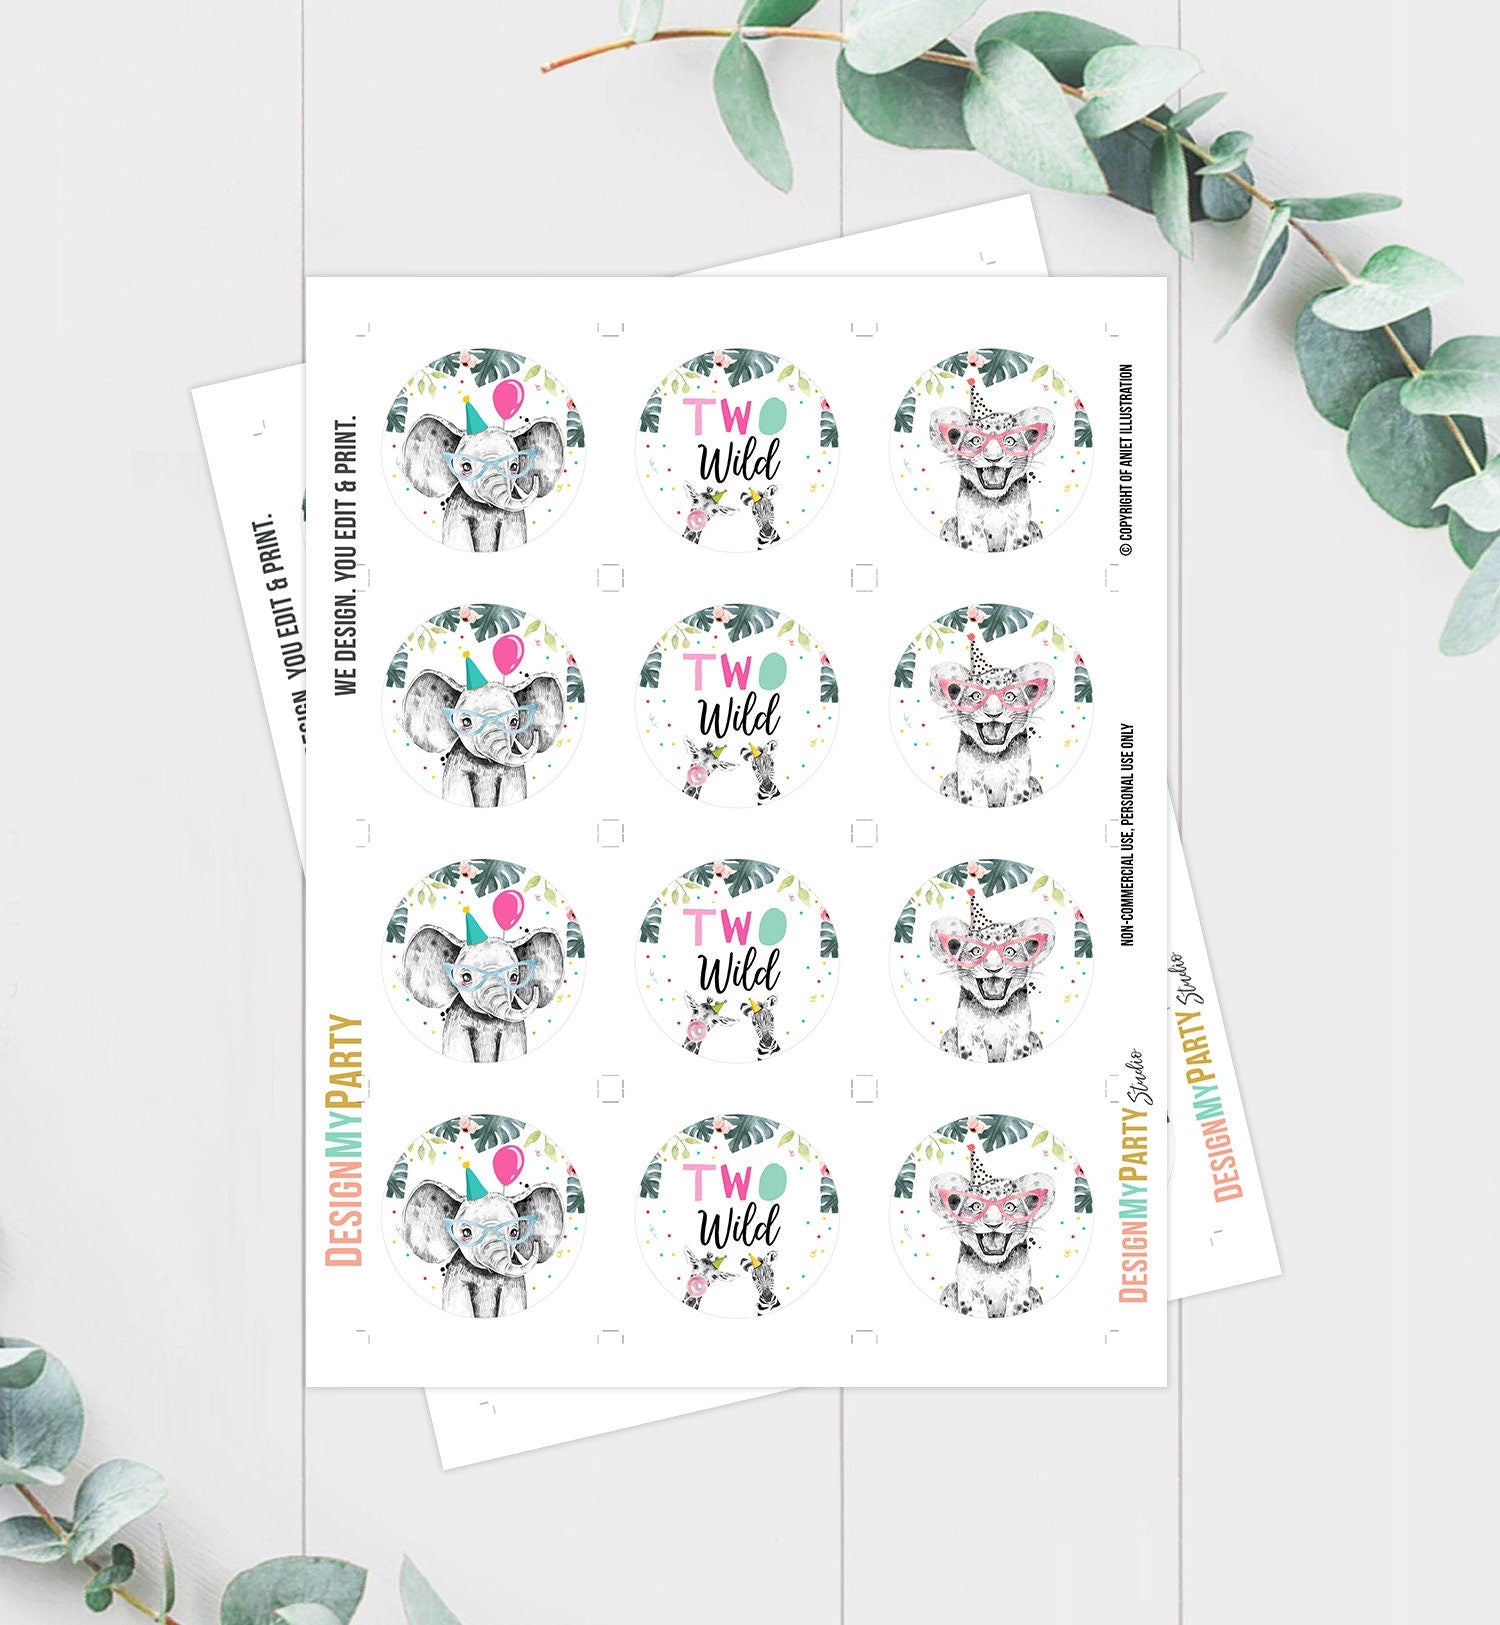 Party Animals Cupcake Toppers Favor Tags Birthday Party Decoration Safari Animals Zoo 2nd Birthday Two Wild download Digital PRINTABLE 0322